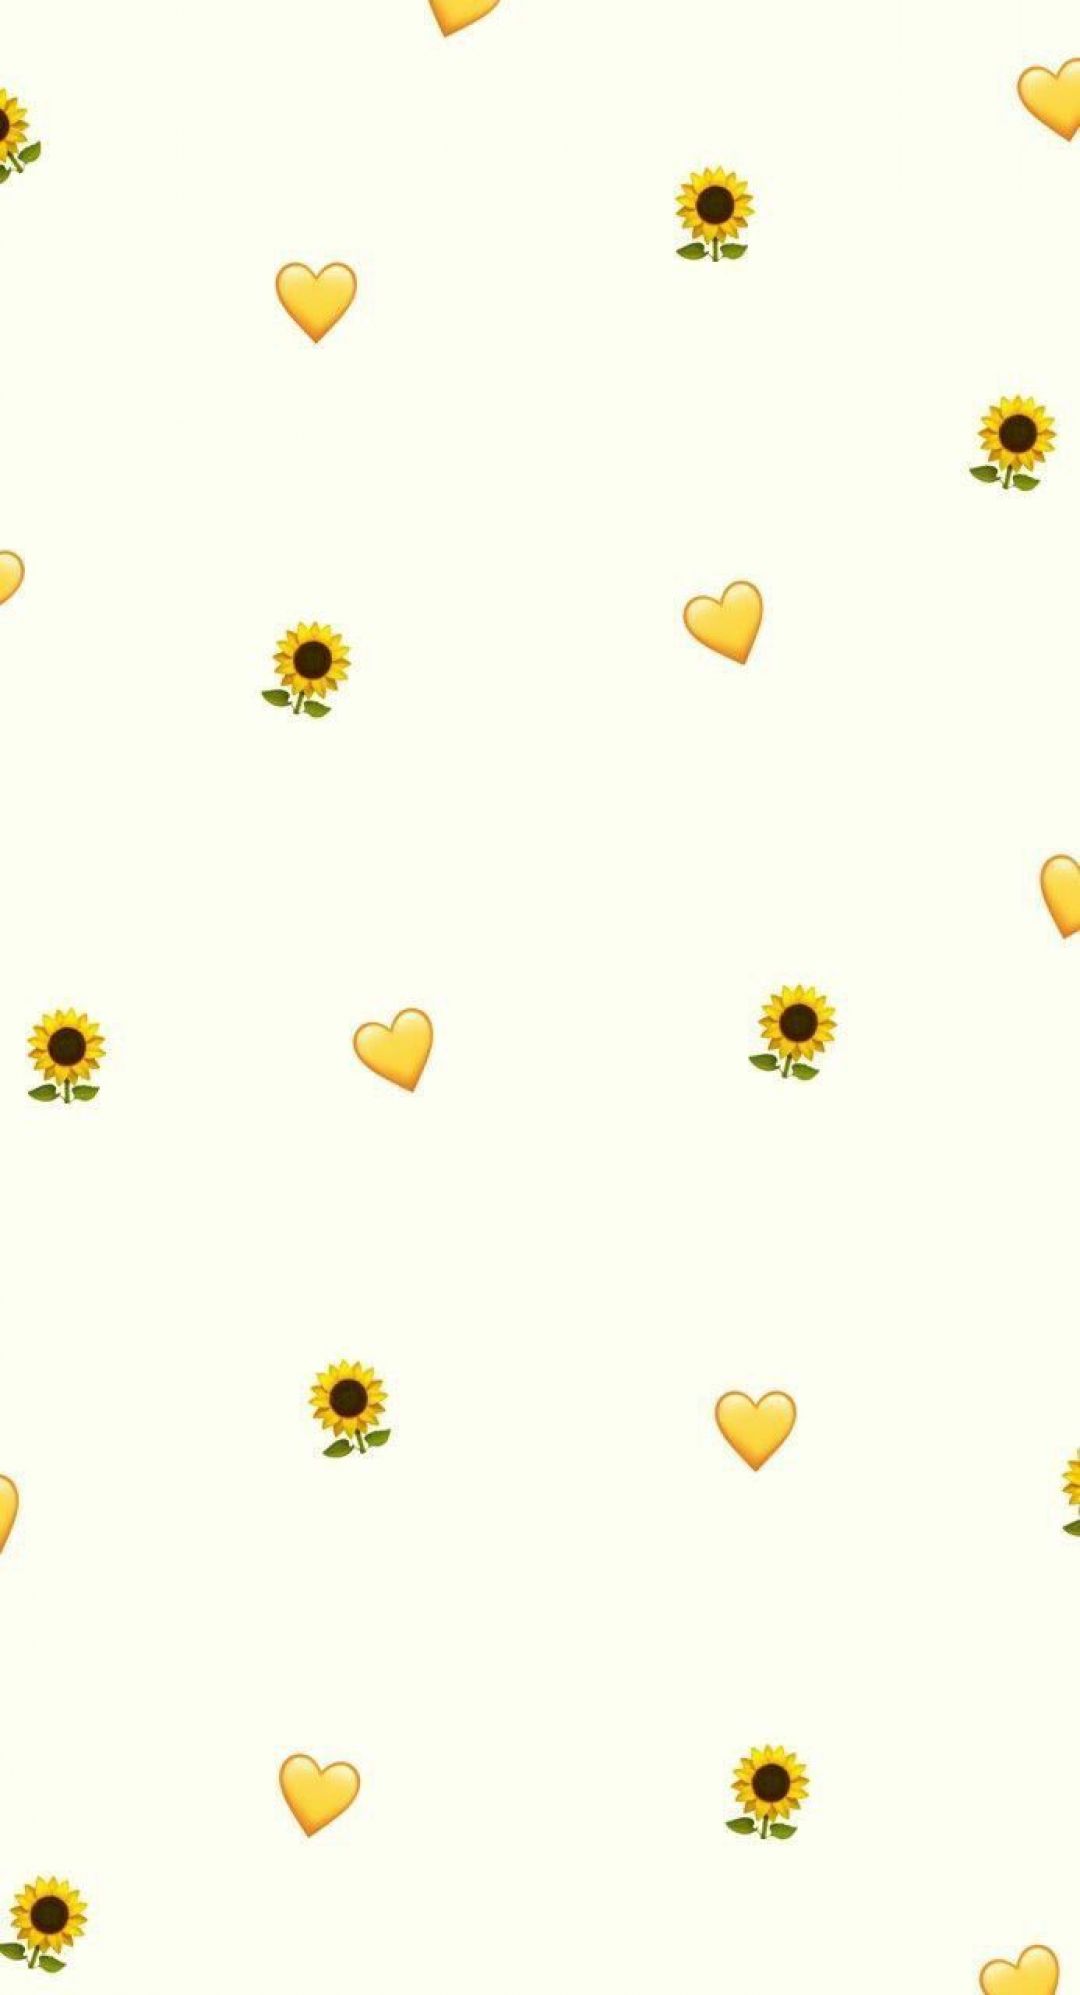 A pattern of sunflowers and hearts on white background - Emoji